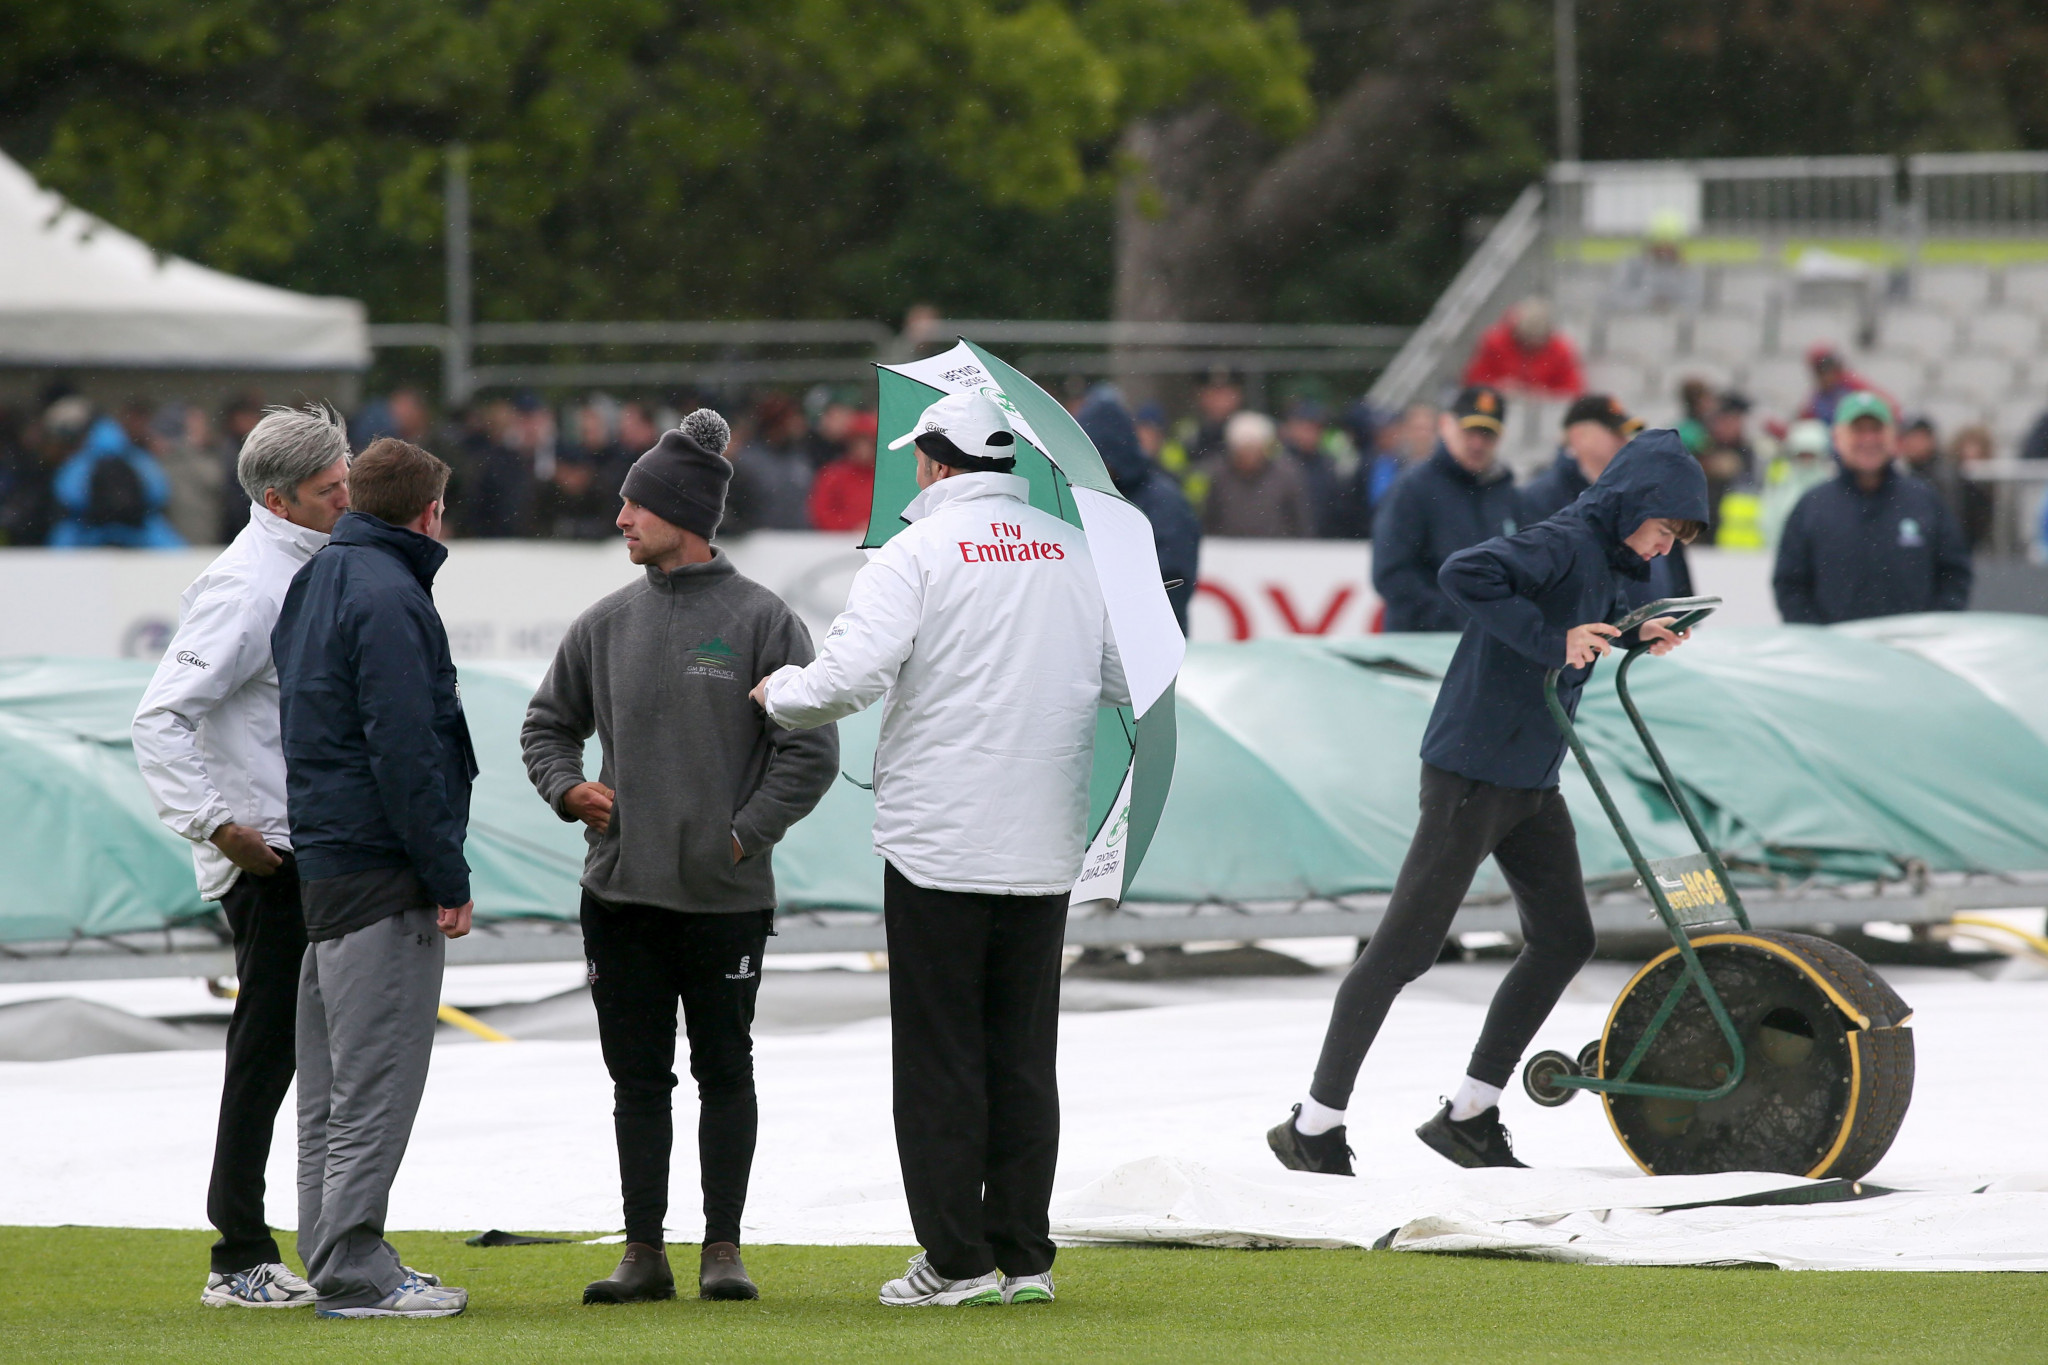 Persistent rain and strong winds were present throughout the day at Malahide Cricket Club near Dublin ©Getty Images